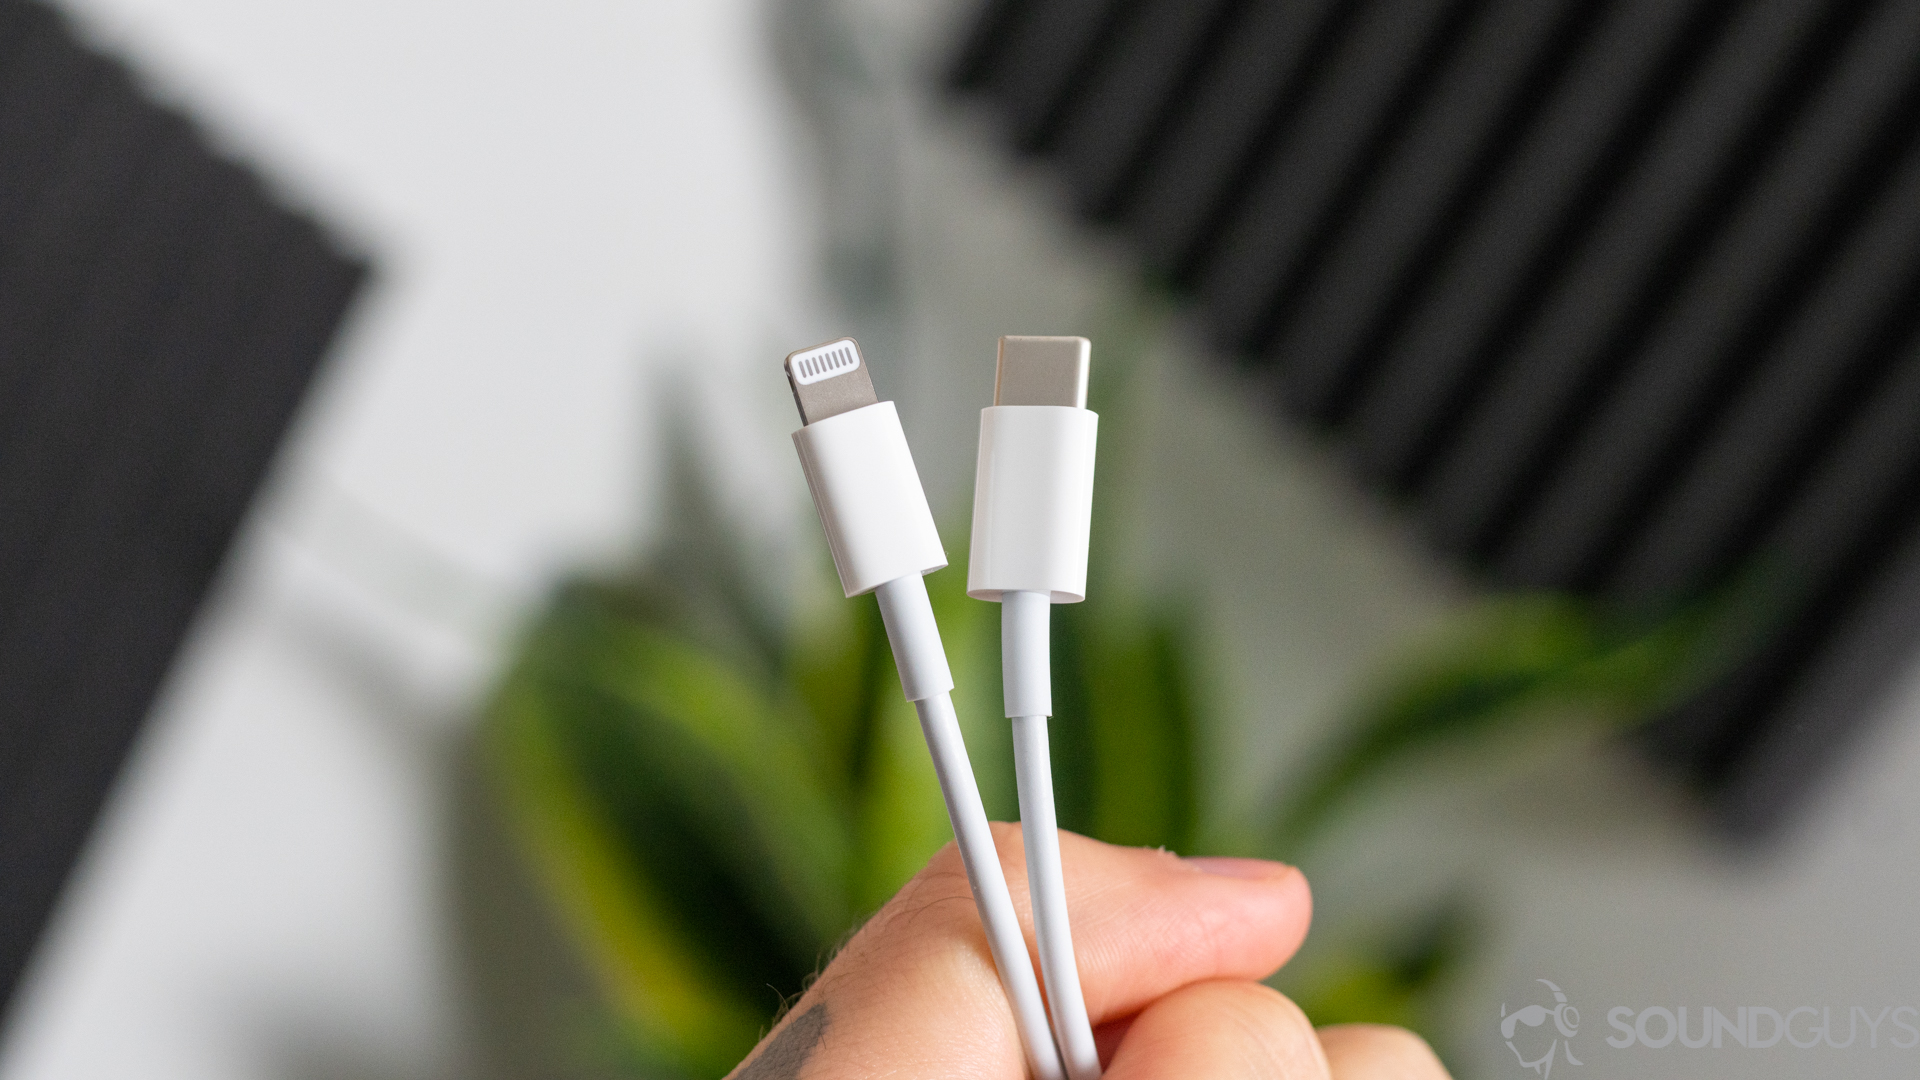 A photo of the AirPods Pro Lightning charging cable in front of a plant.